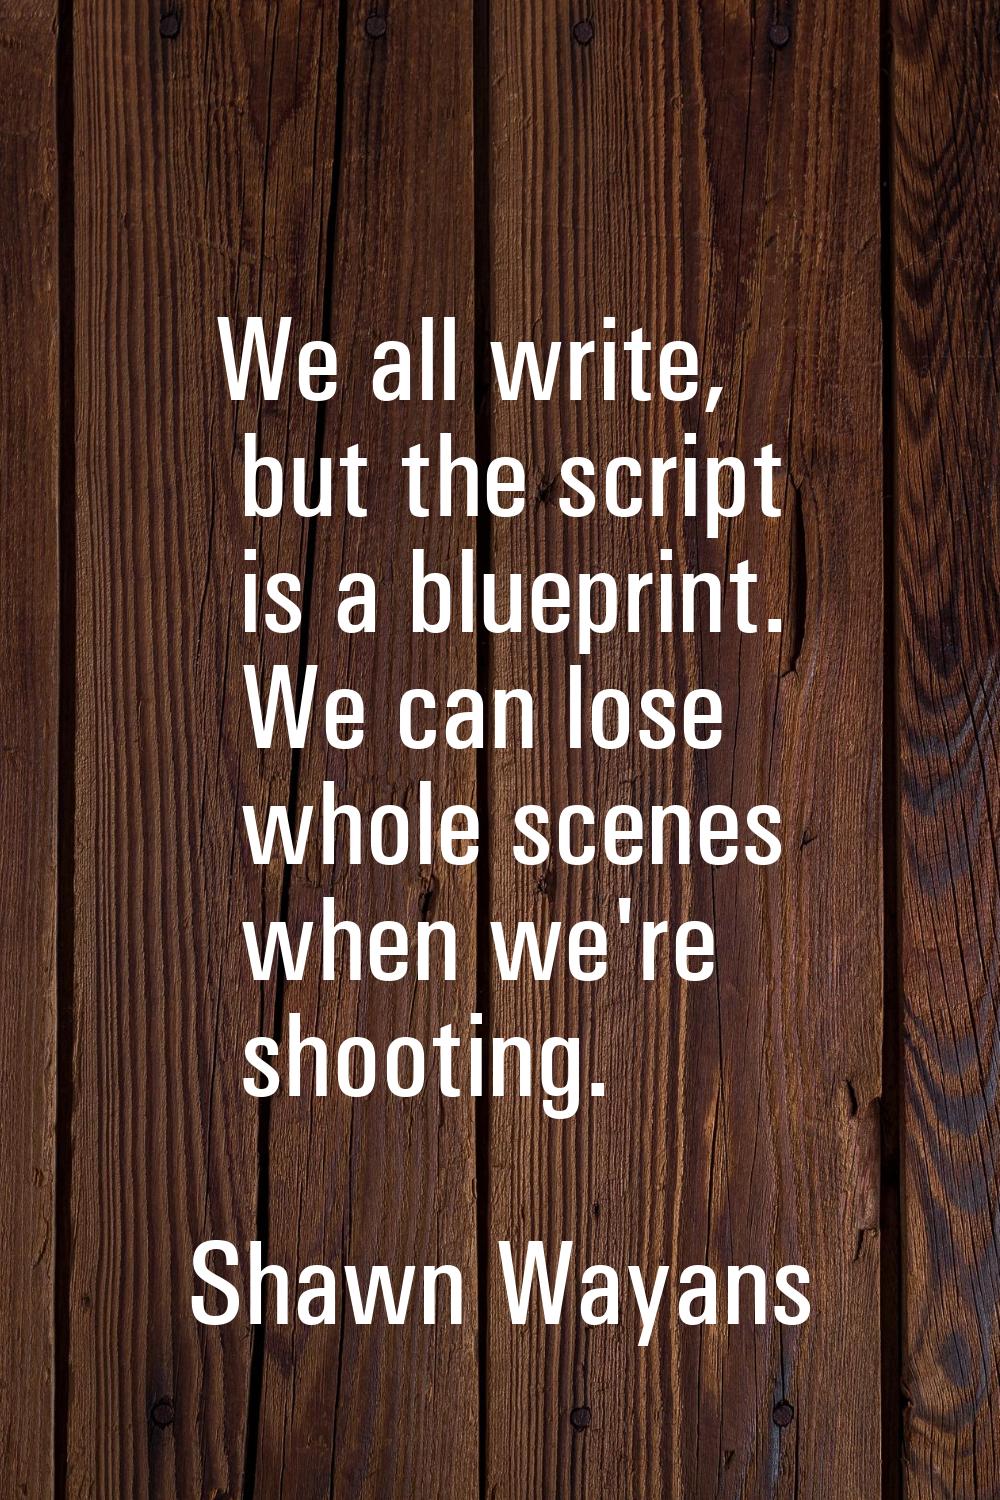 We all write, but the script is a blueprint. We can lose whole scenes when we're shooting.